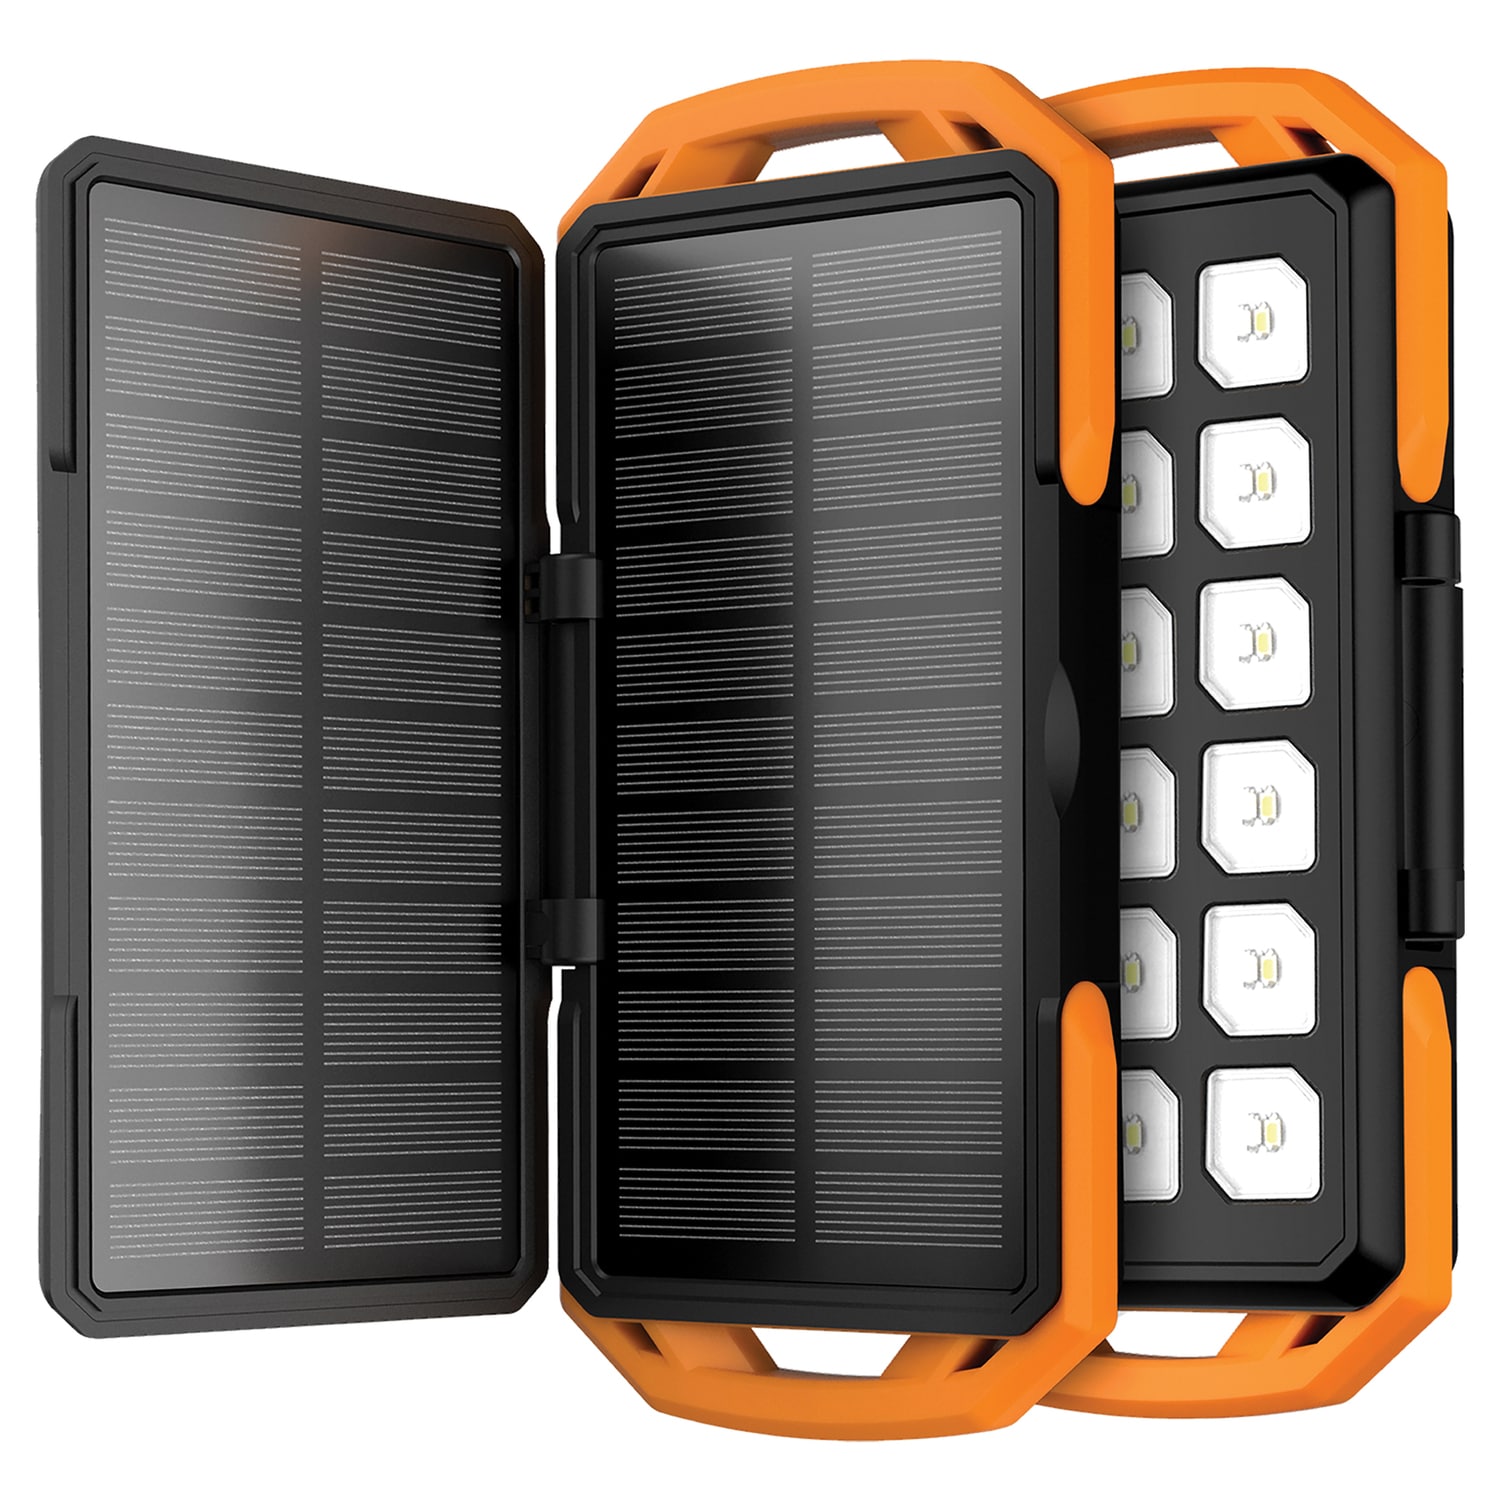 USB-A/-C Power Bank with Solar Panel